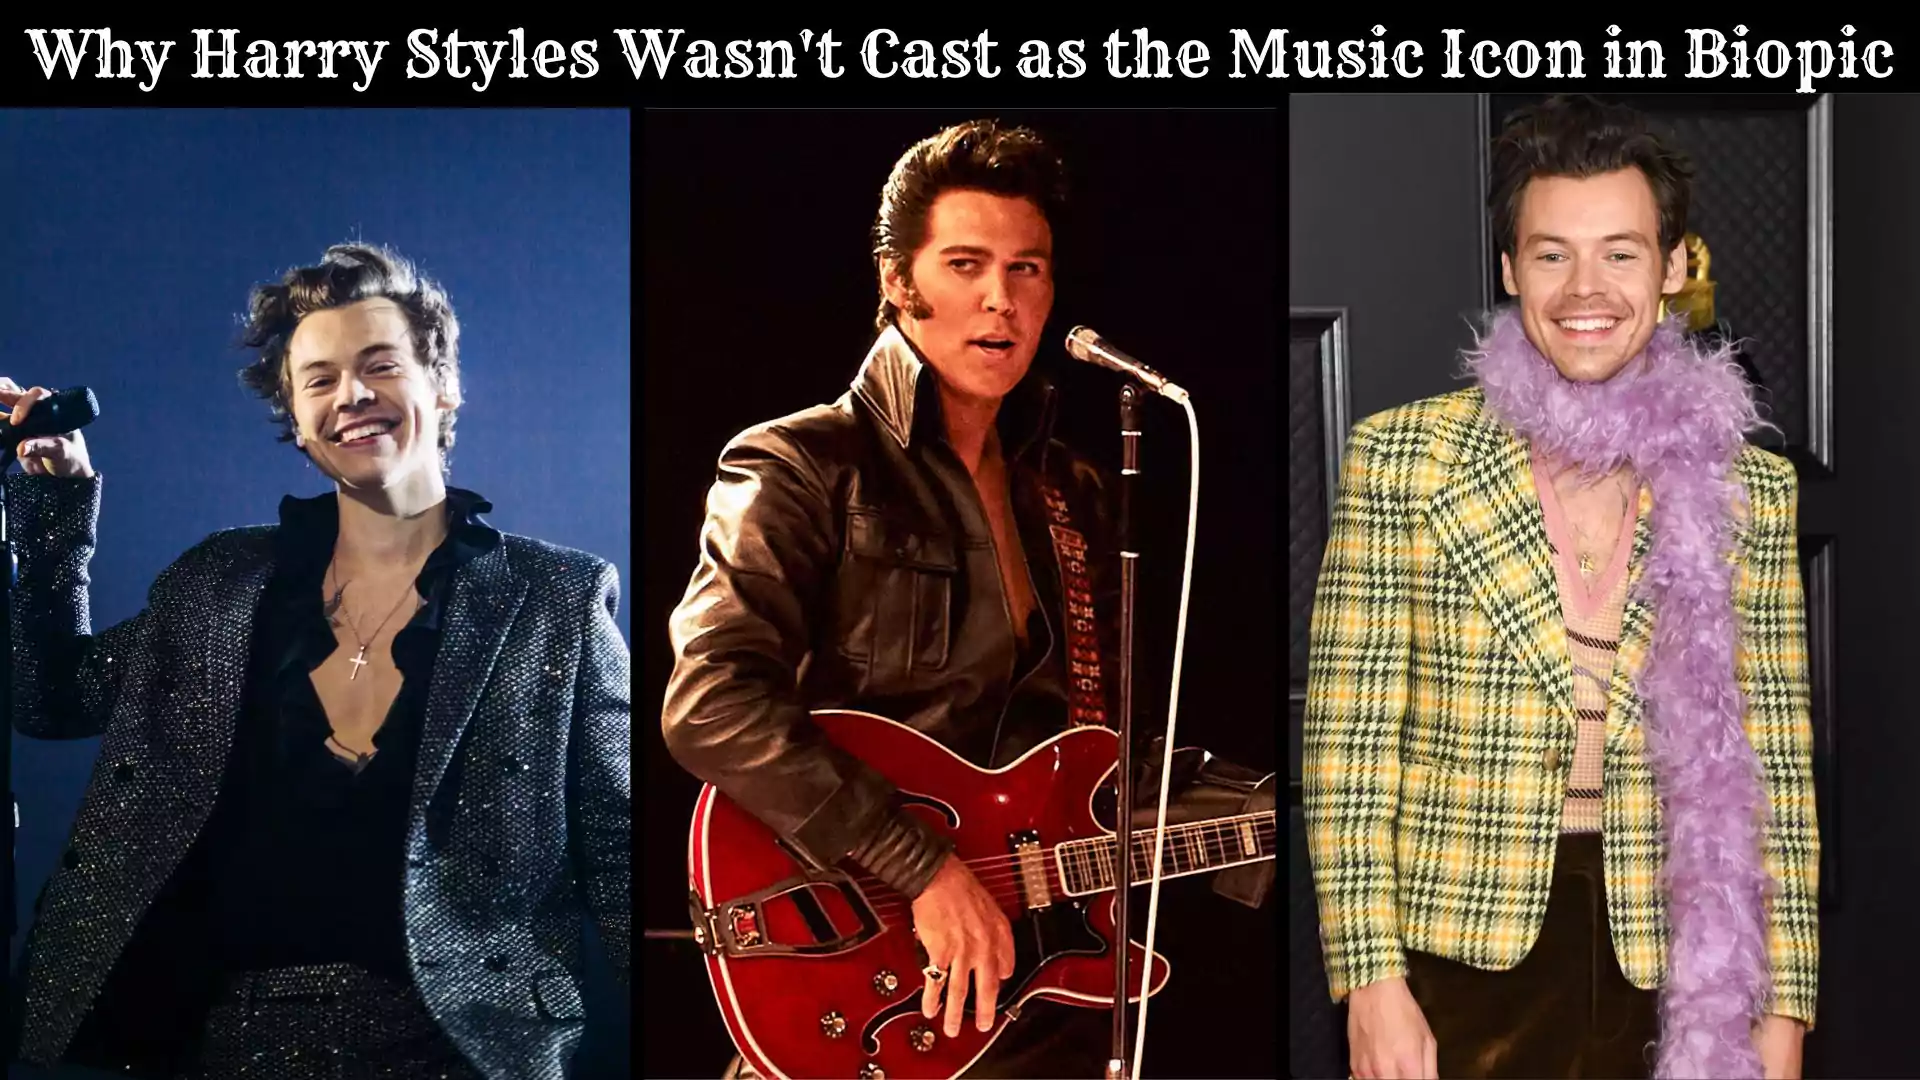 Why Harry Styles Wasn't Cast as the Music Icon in Biopic